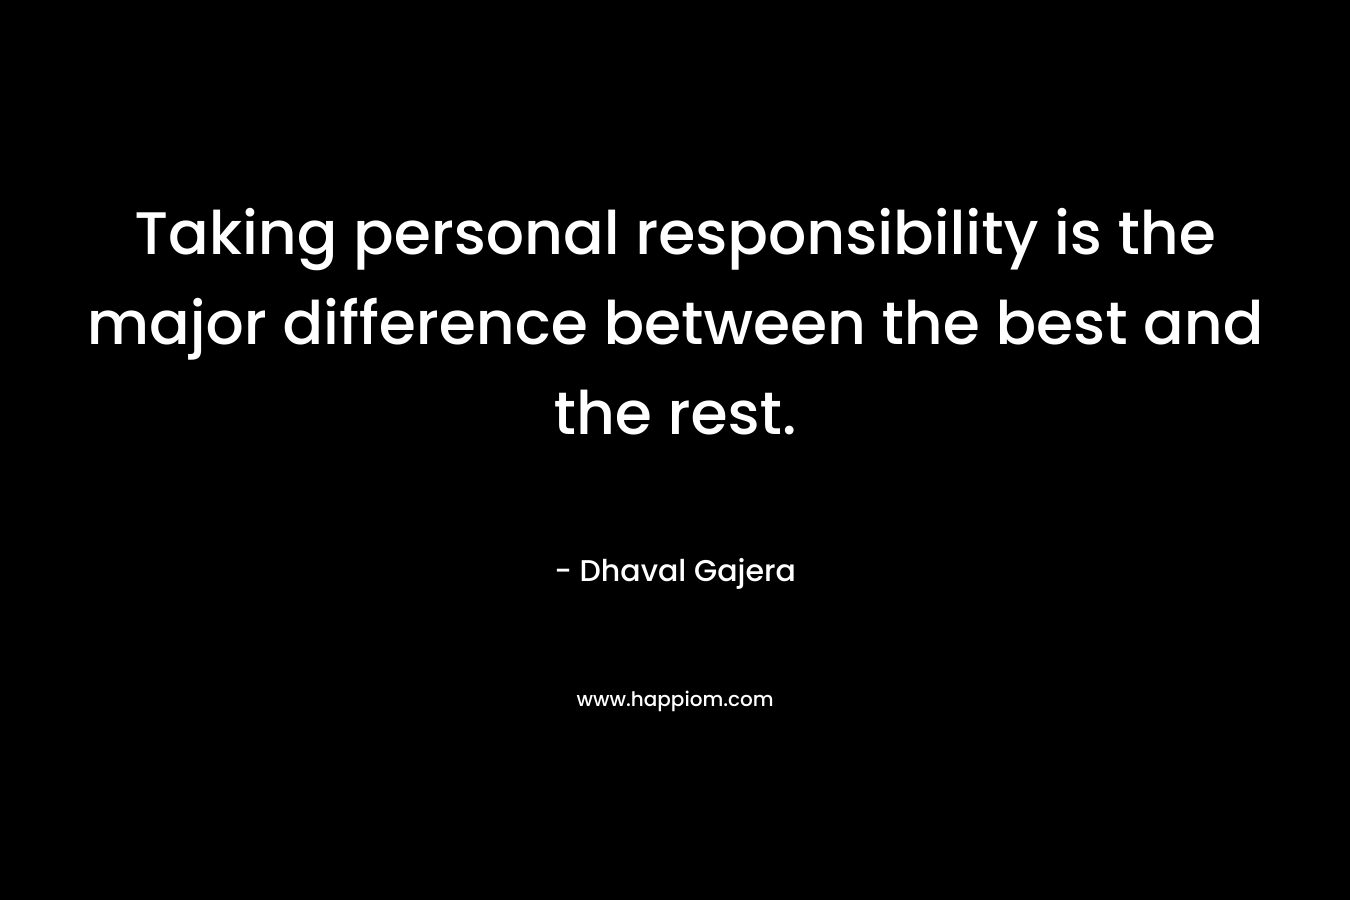 Taking personal responsibility is the major difference between the best and the rest.